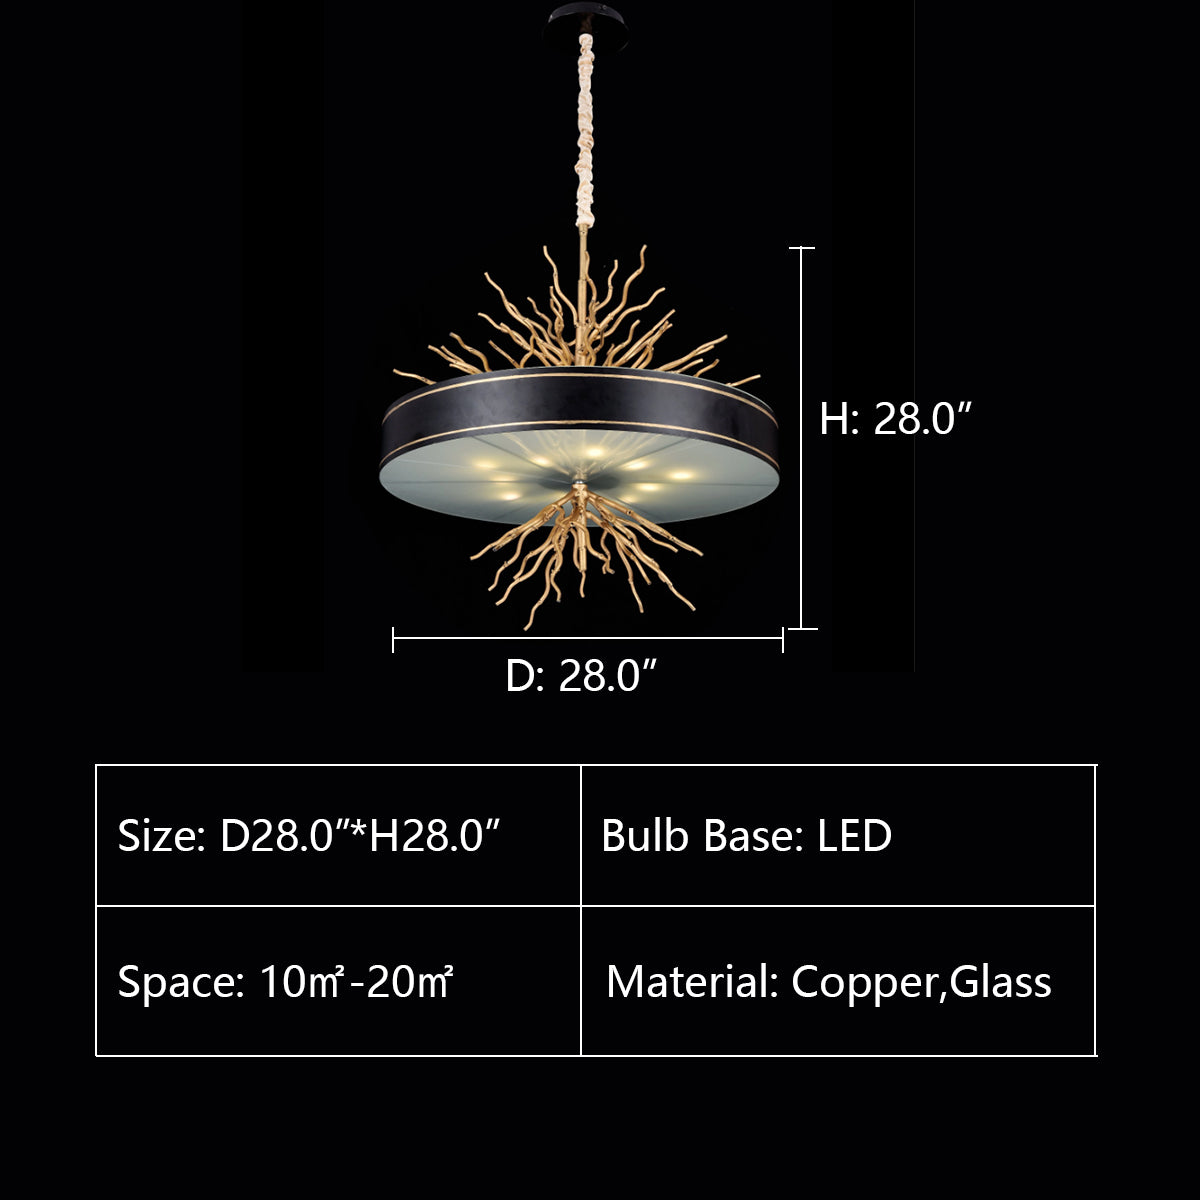 D28.0"*H28.0" ORGANIC DRUM BRANCHING PENDANT LIGHT 8031-700,chandelier,chandeliers,branch,copper,brass,drum,glass, ceiling,gold,light luxury,creative,art,dining room,living room,office ,coffee shop